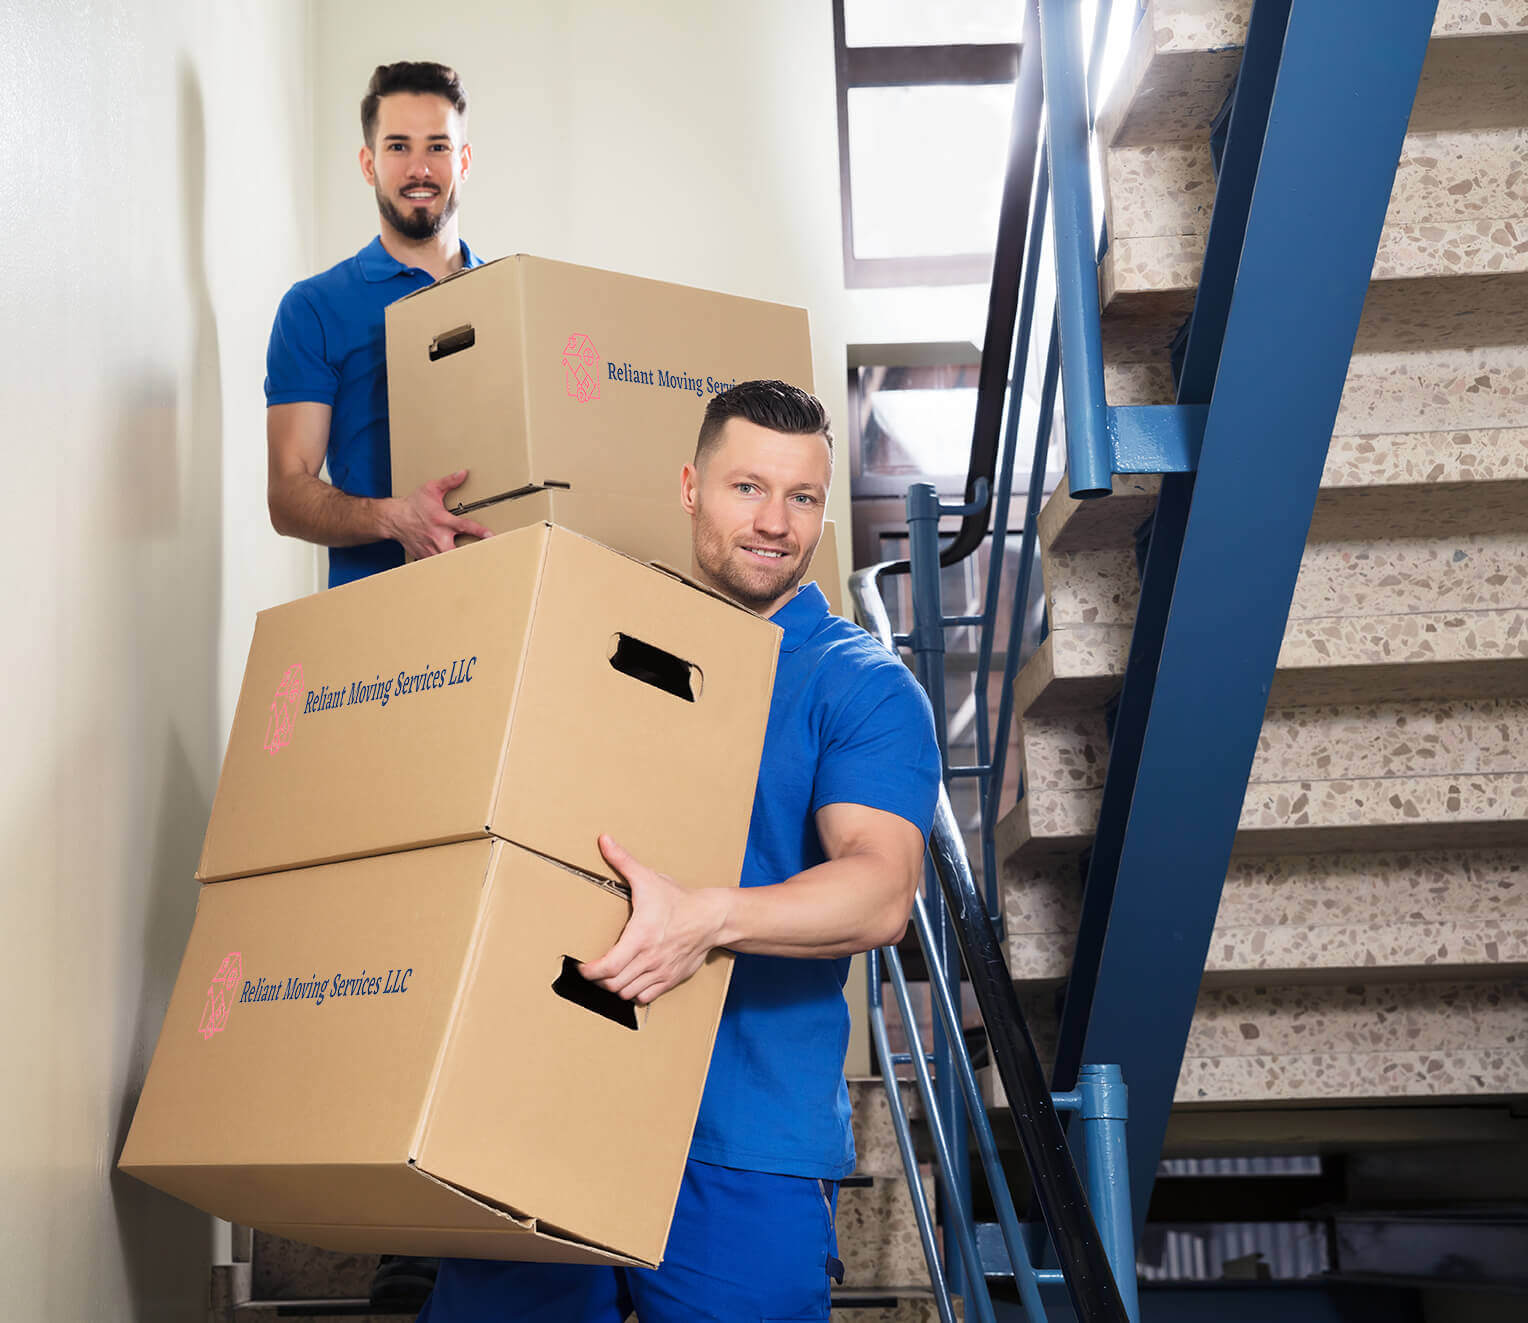 DFW Movers | DFW Moving Company providing Moving Services in DFW